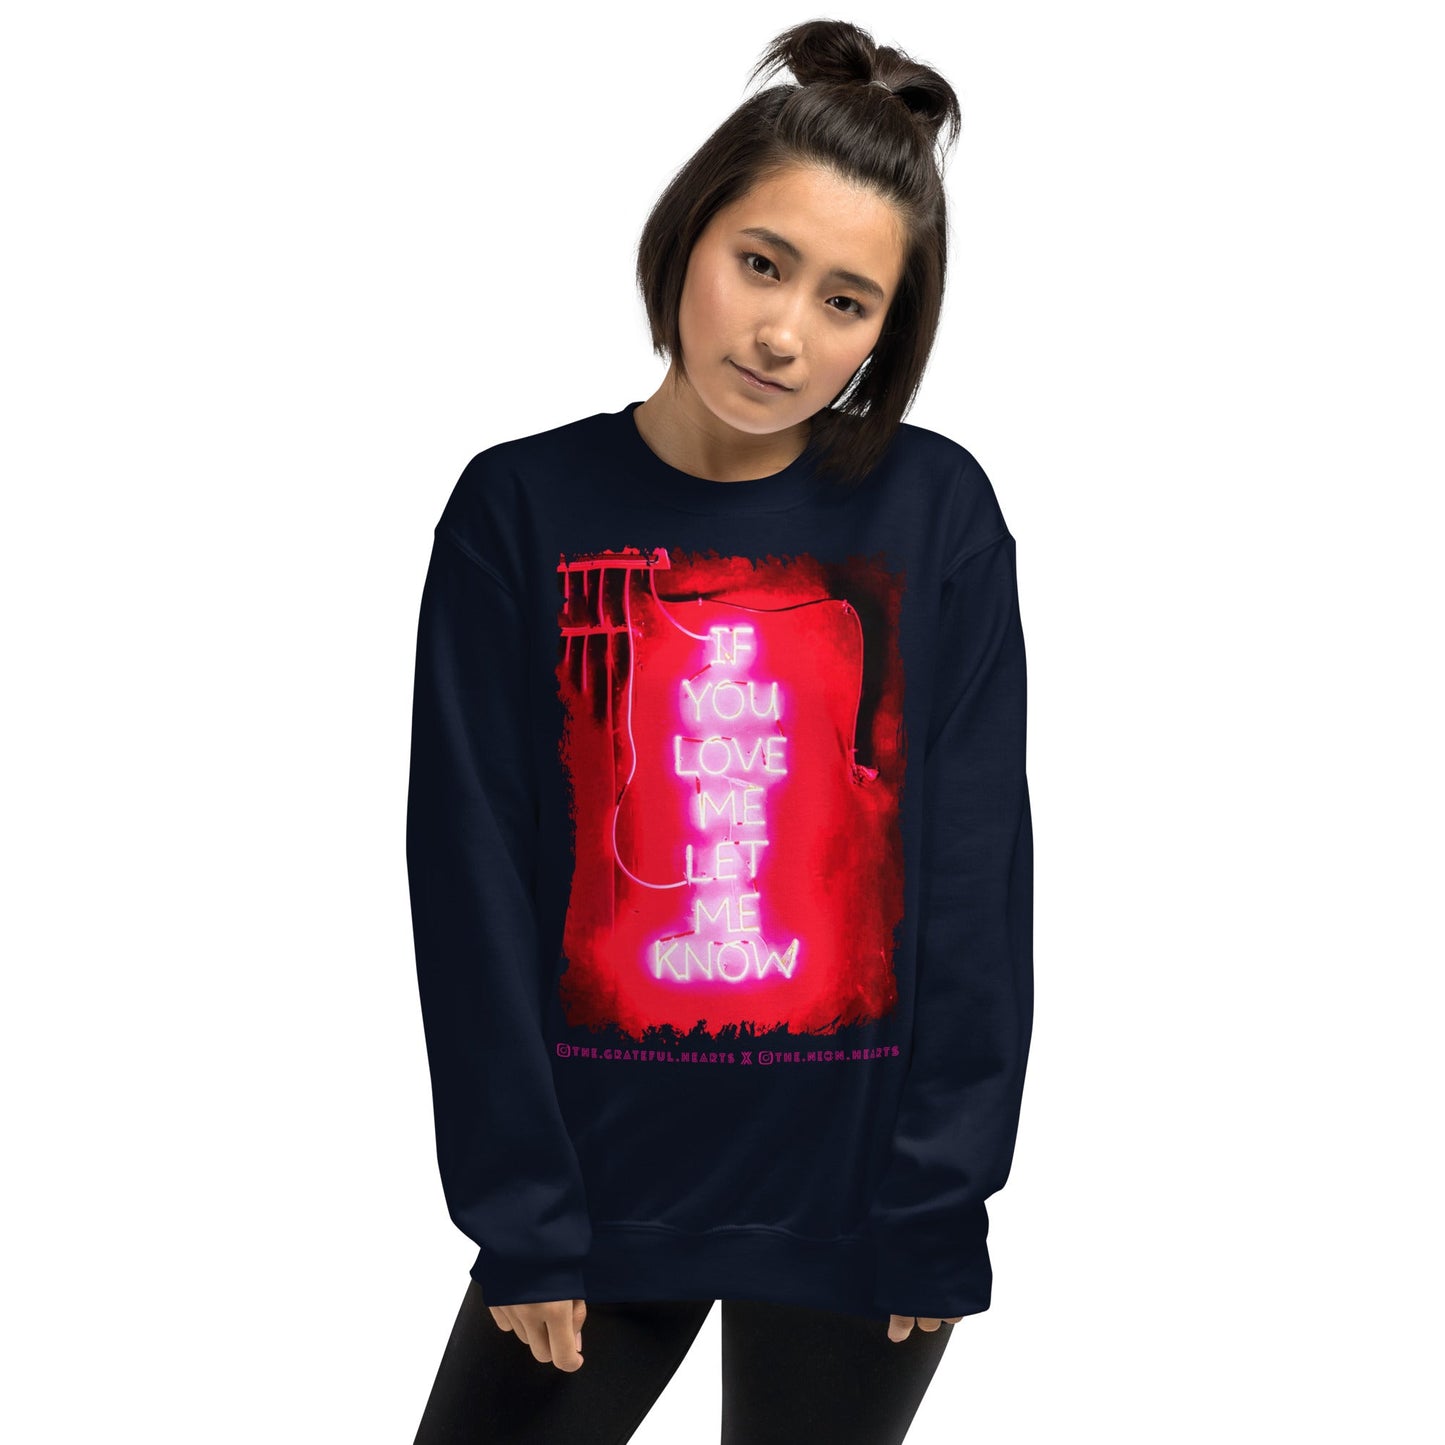 If You Love Me Let Me Know ❤️ - Unisex Sweatshirt (Available in Various Colors 💖💙💜) - The Grateful Hearts